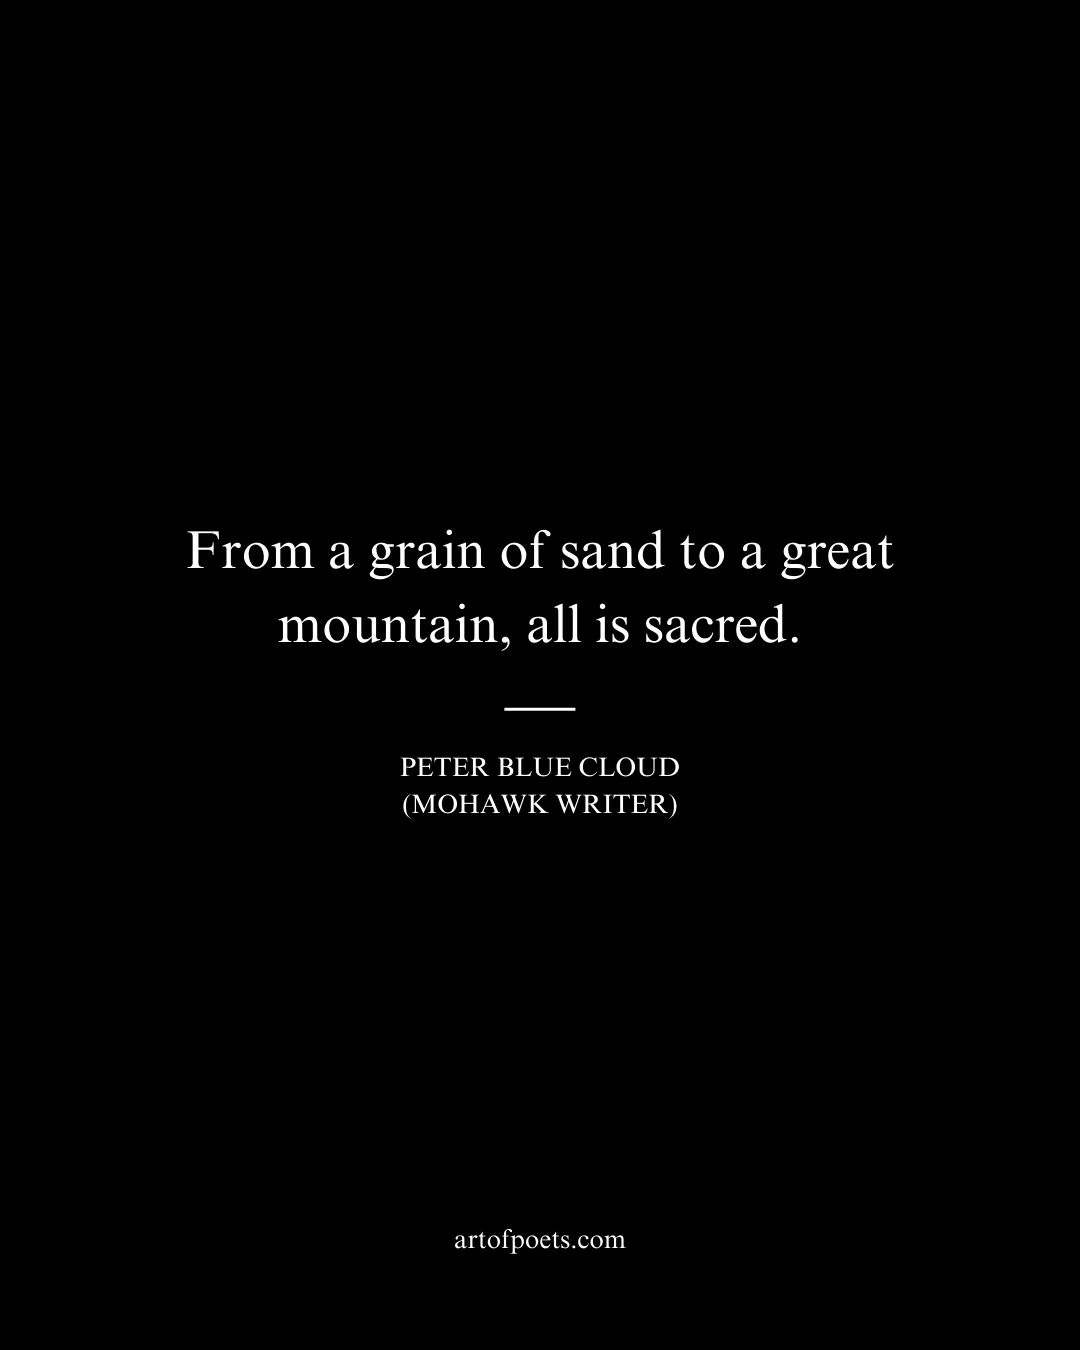 From a grain of sand to a great mountain all is sacred